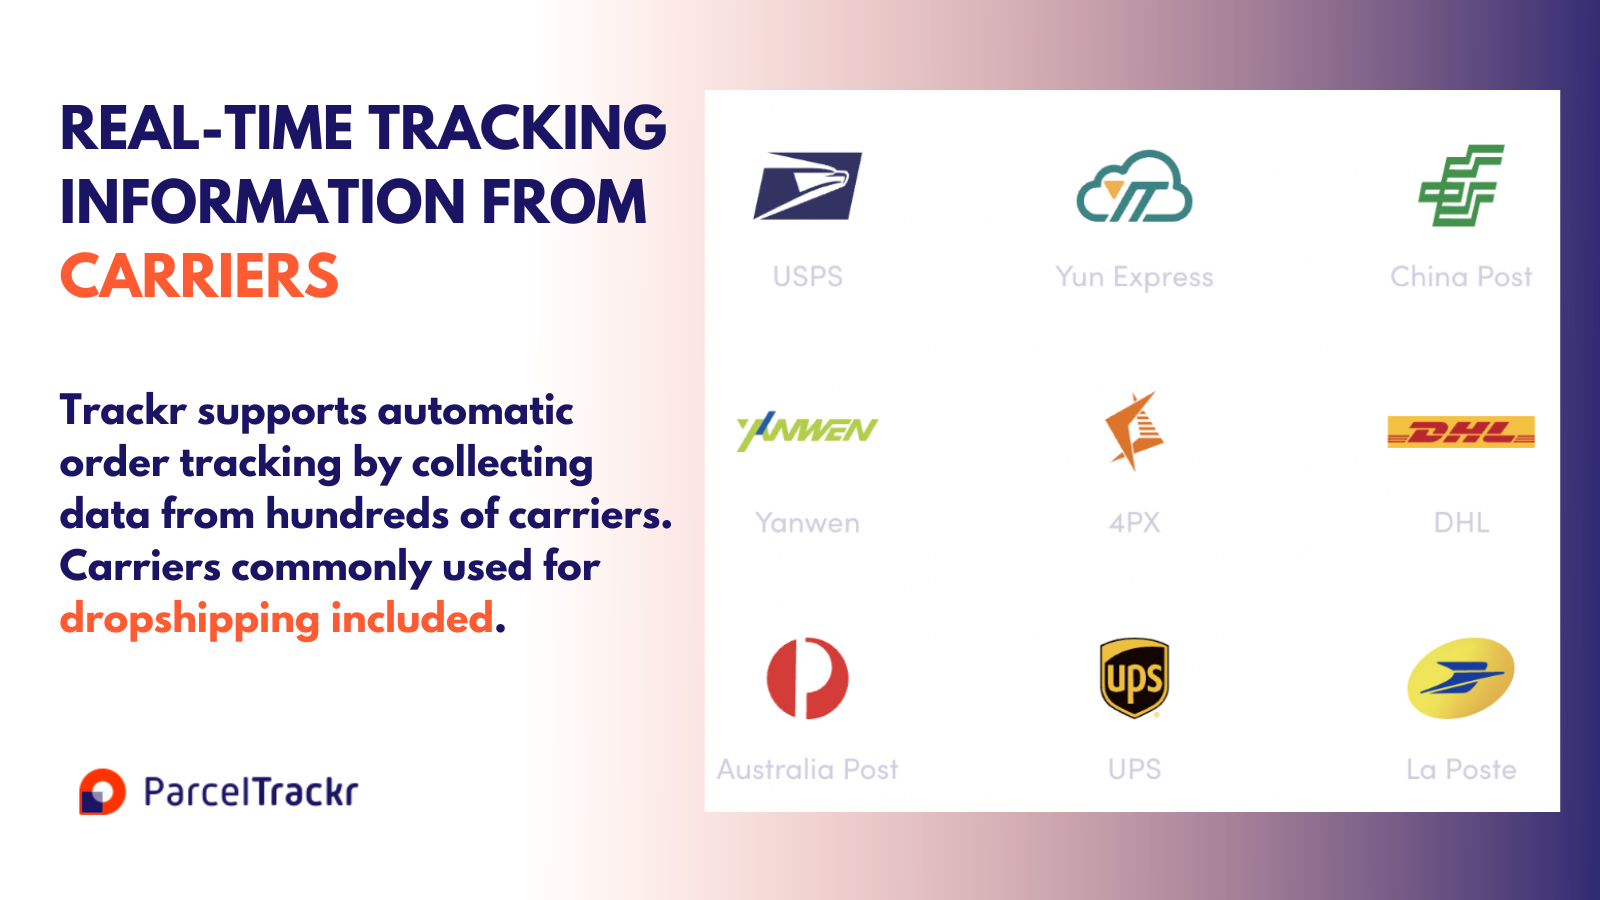 Parcel Tracking app | Get info from 900 carriers to track orders